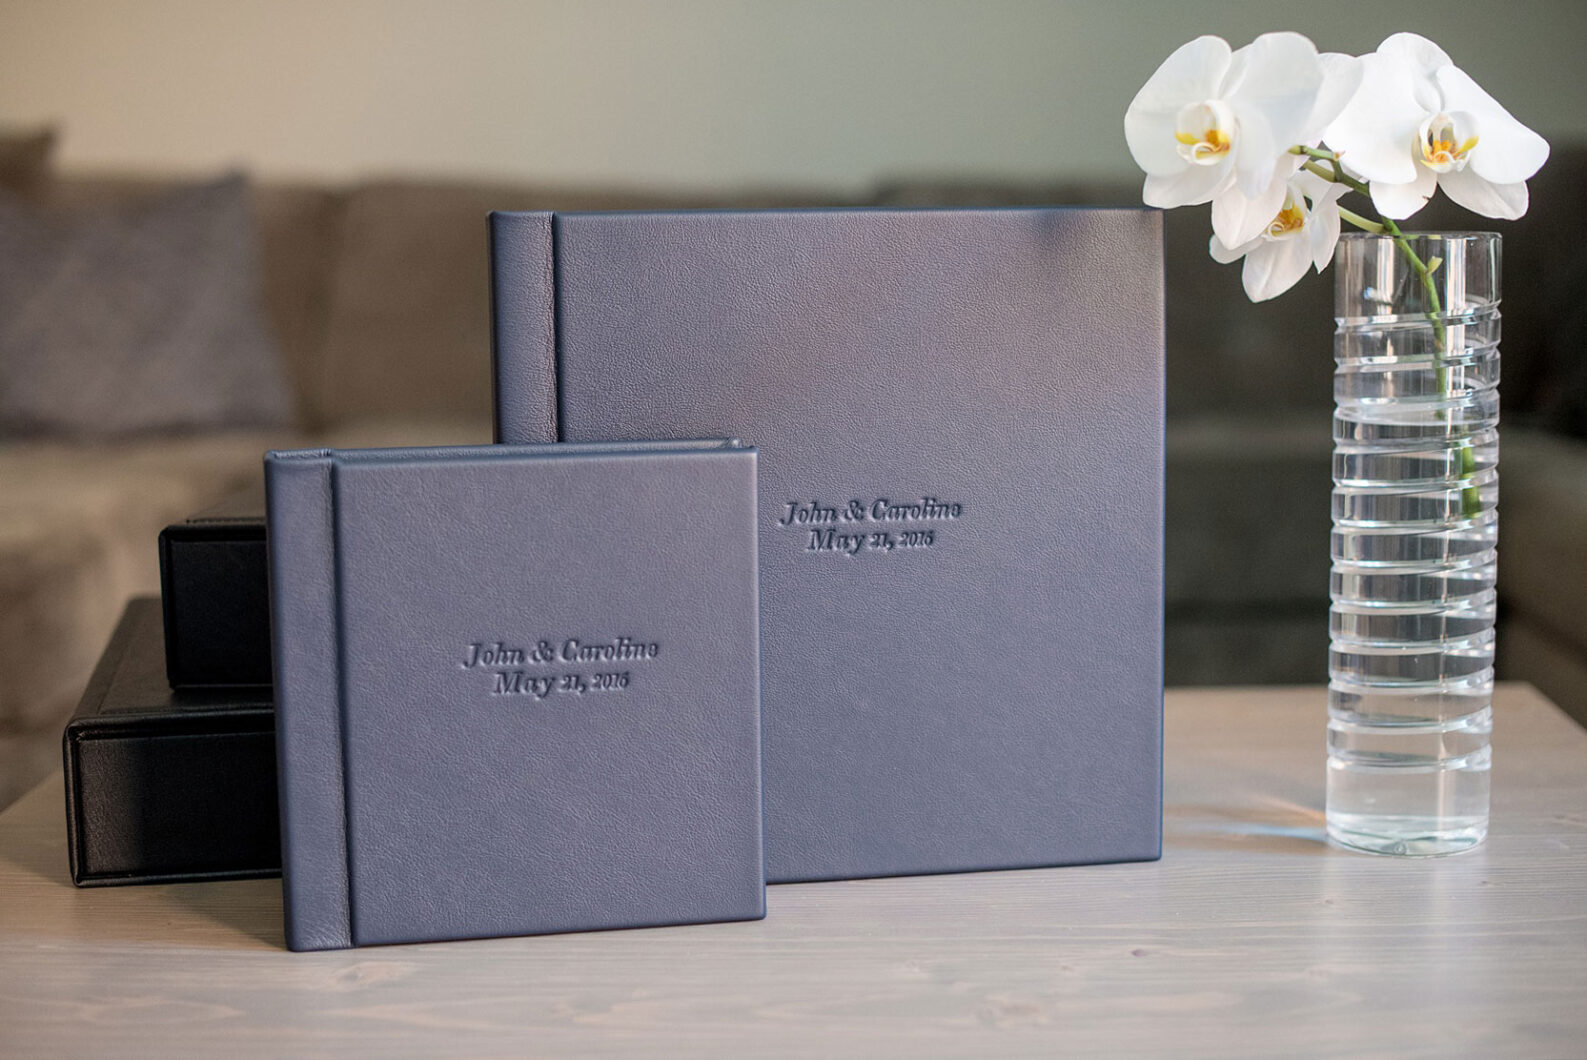 Images of a fine art leather wedding album in navy blue from Mikkel Paige Photography, a Raleigh, NC photographer.